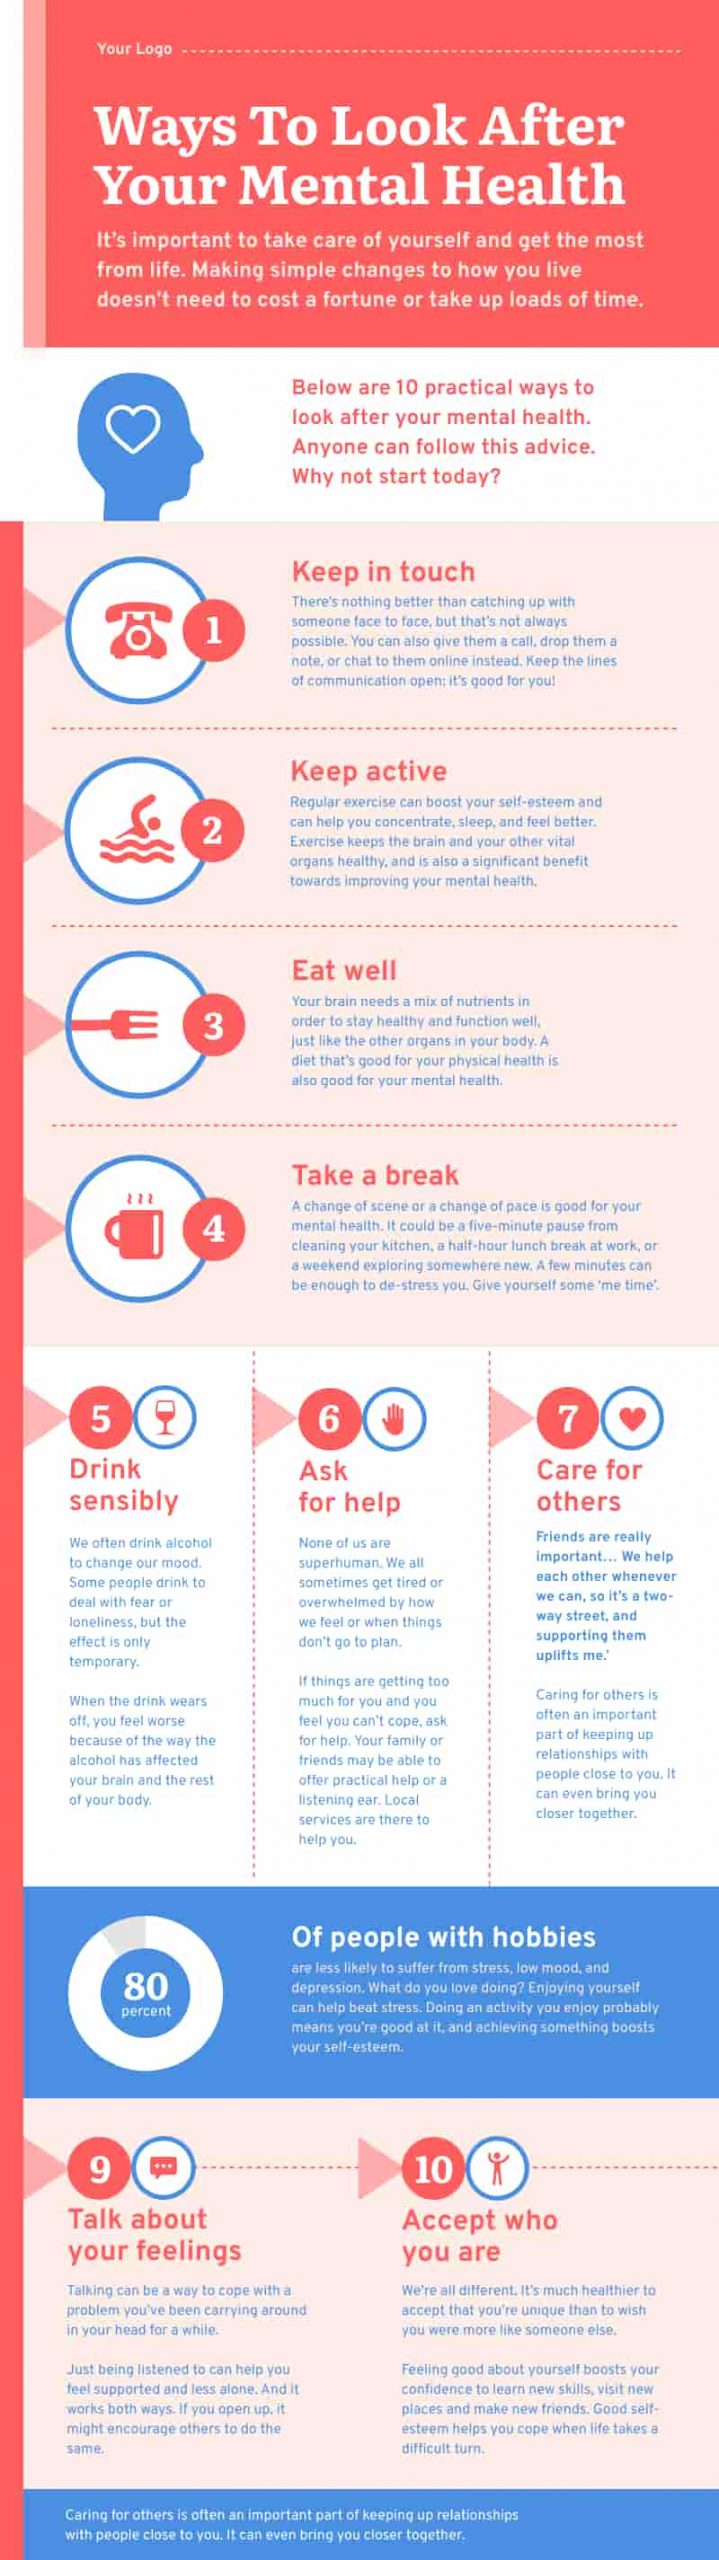 how to look after your mental health infographic template